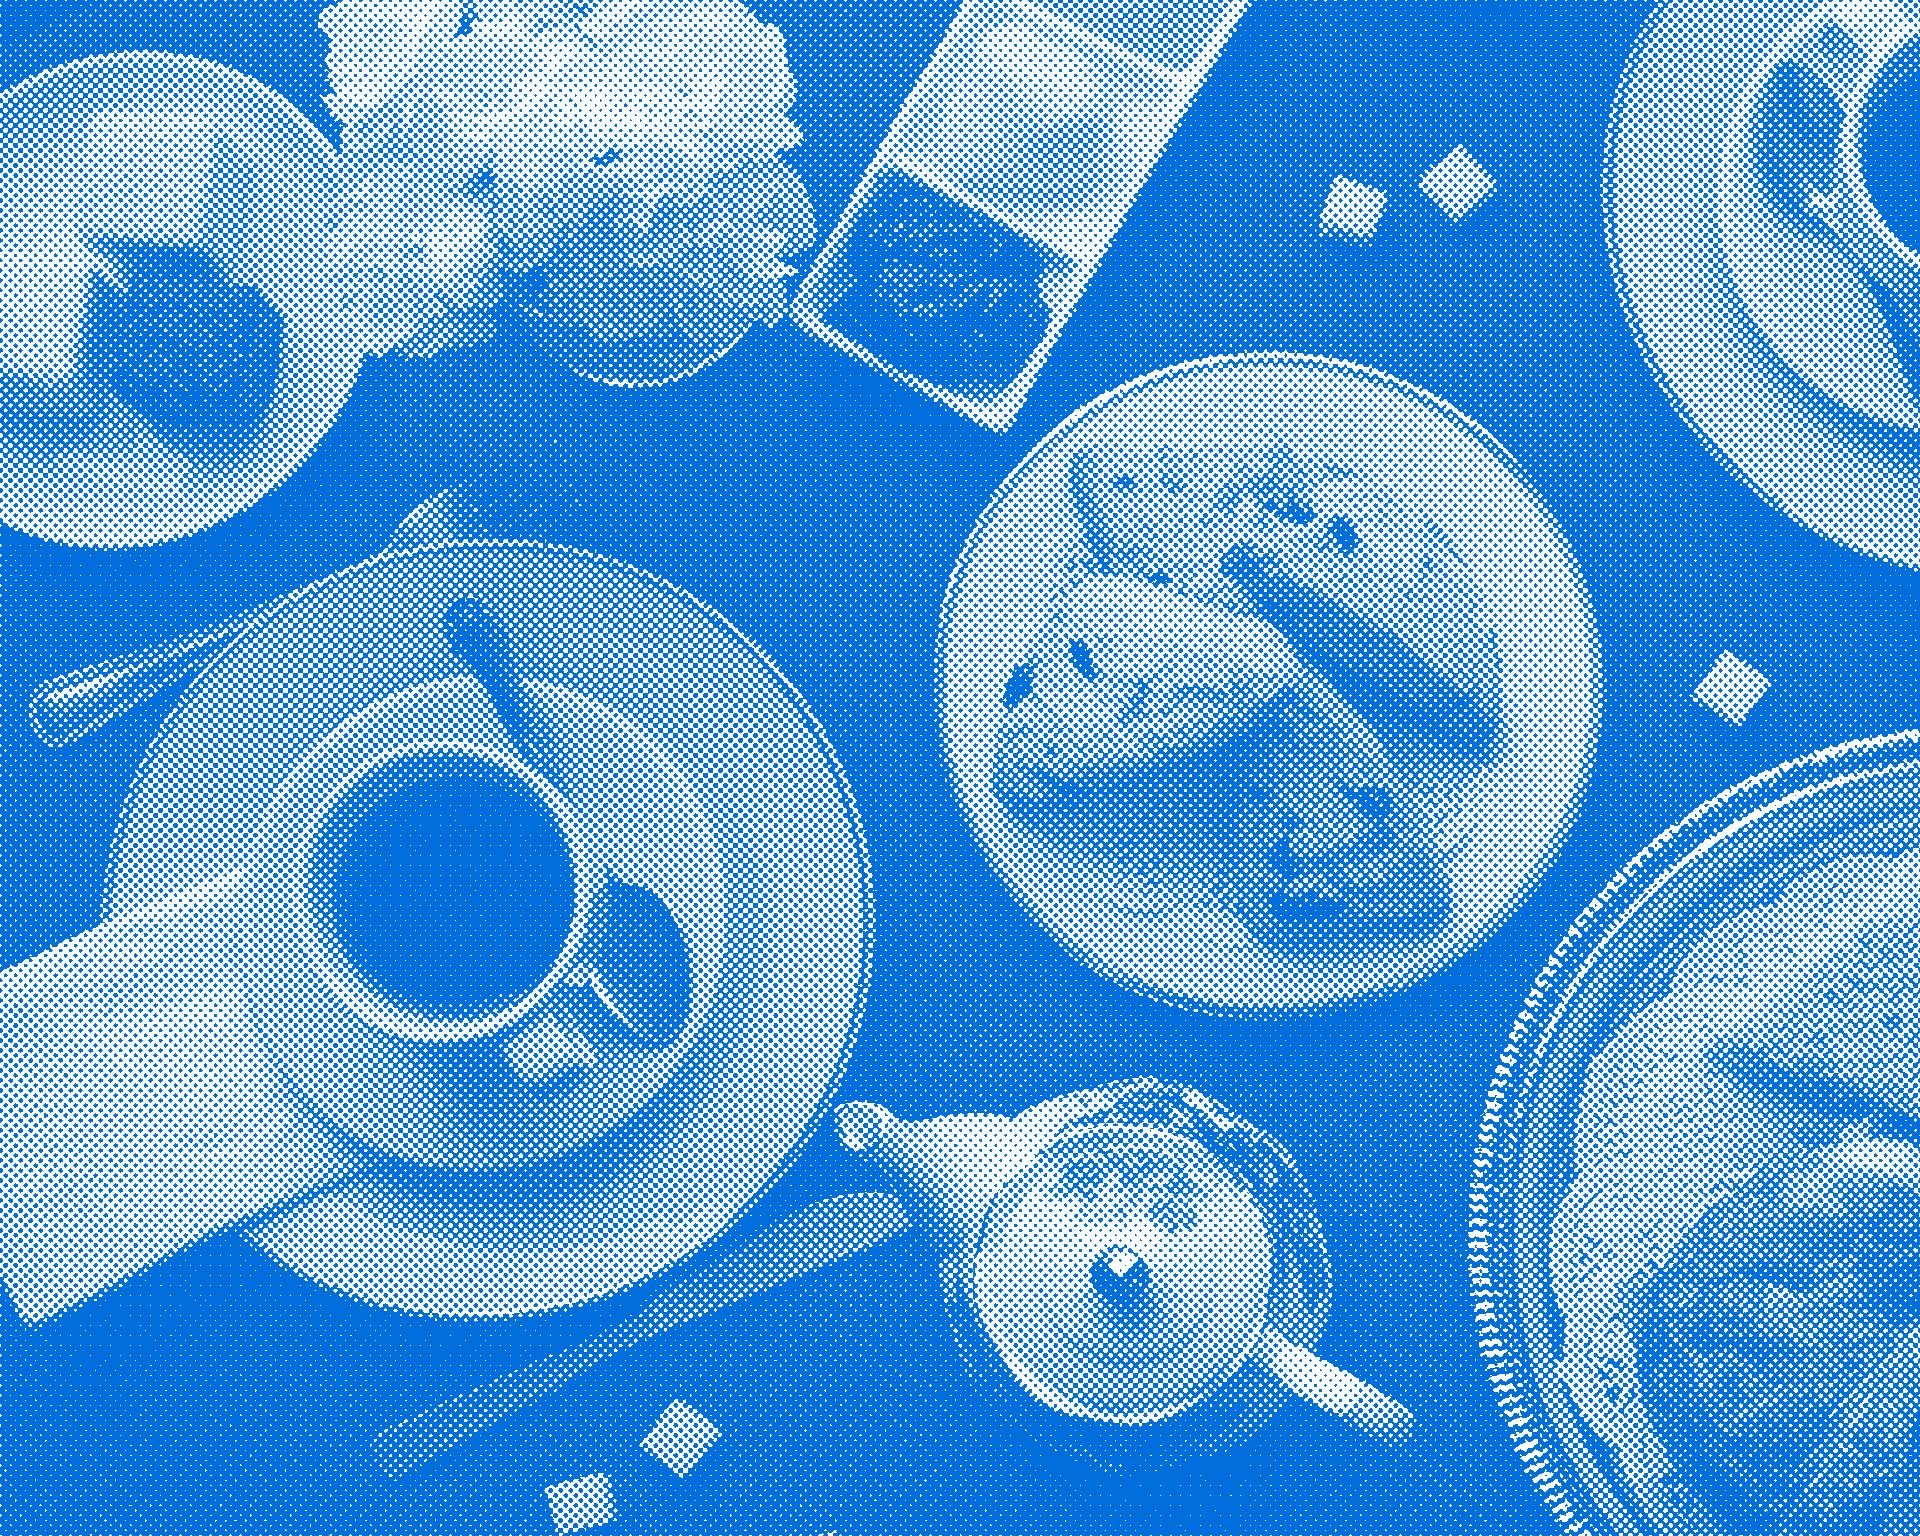 A halftone image of a table top, photographed from directly above, containing teacups, scones,  finger sandwiches, petit fours and scattered sugar cubes.